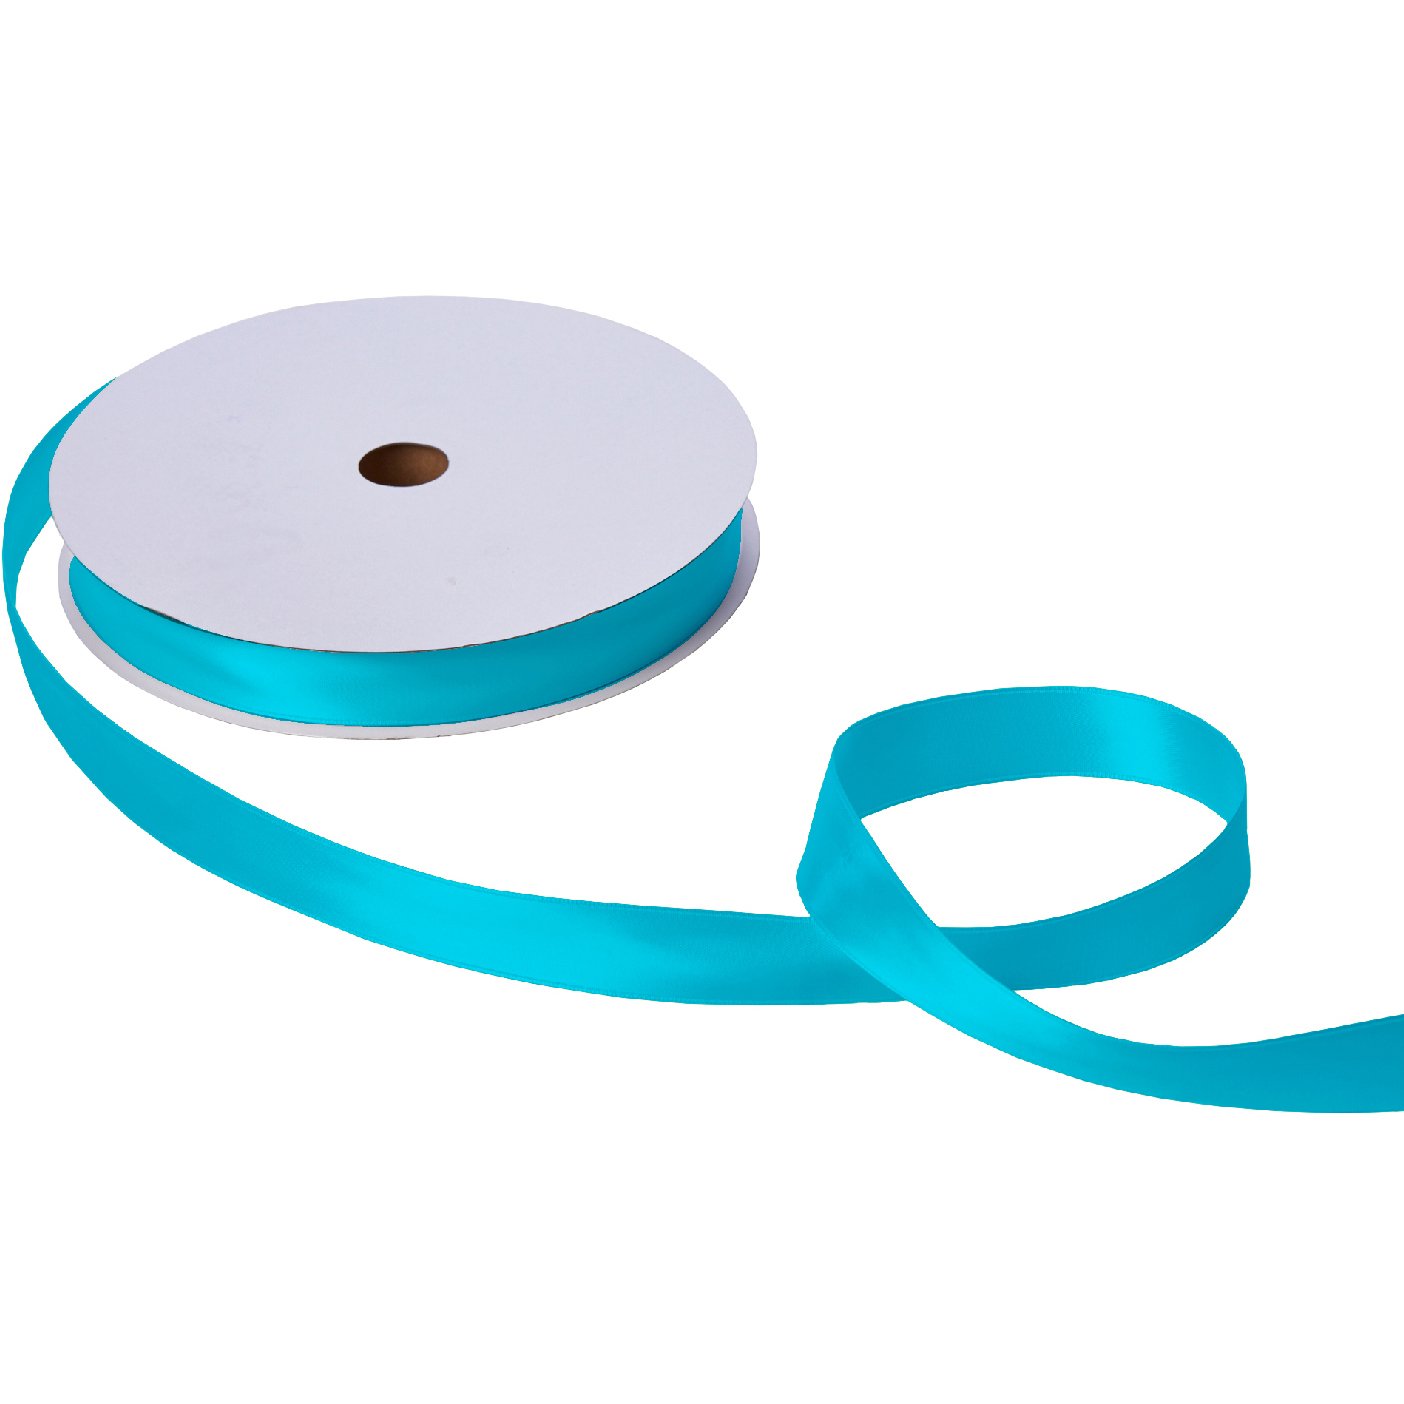 Jillson & Roberts Double-Faced Satin Ribbon, 1" Wide x 100 Yards, Turquoise